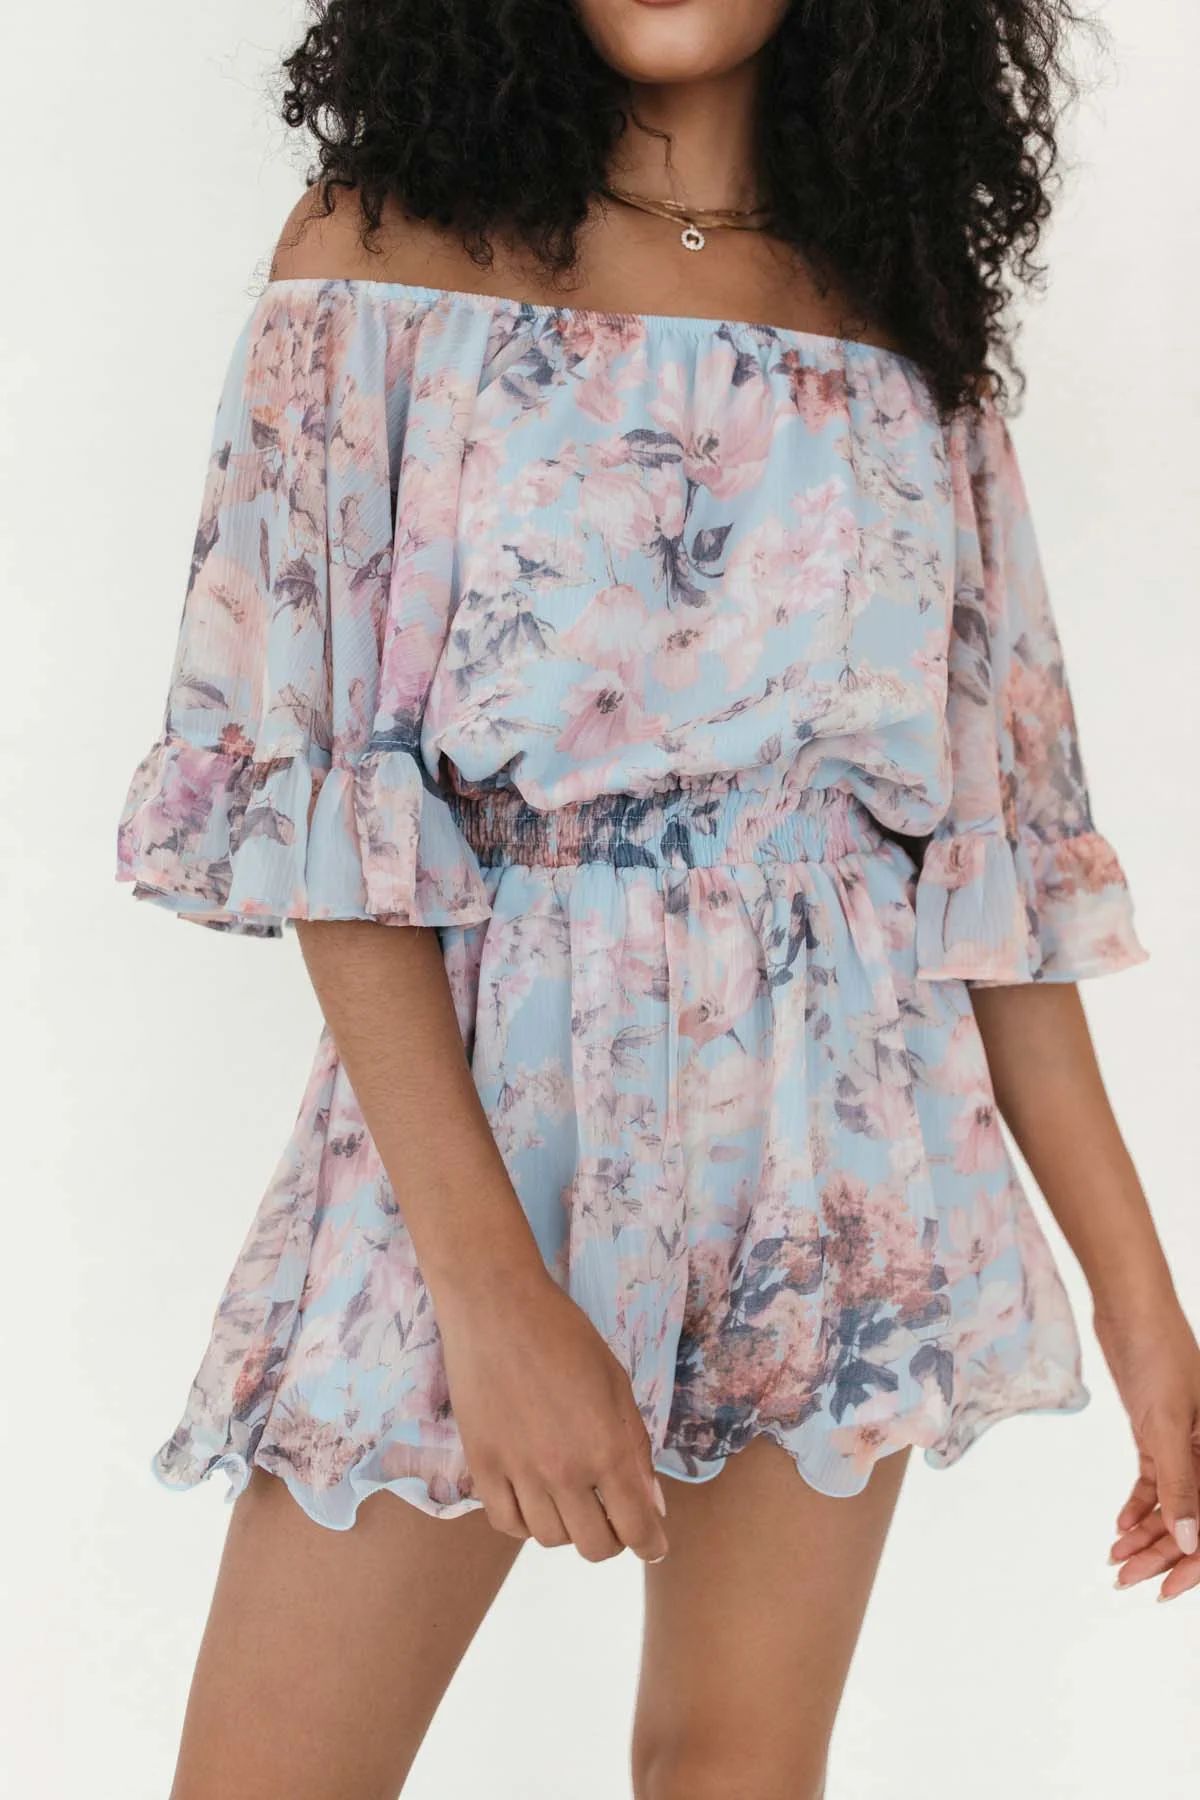 Everleigh Floral Romper - FINAL SALE | The Post